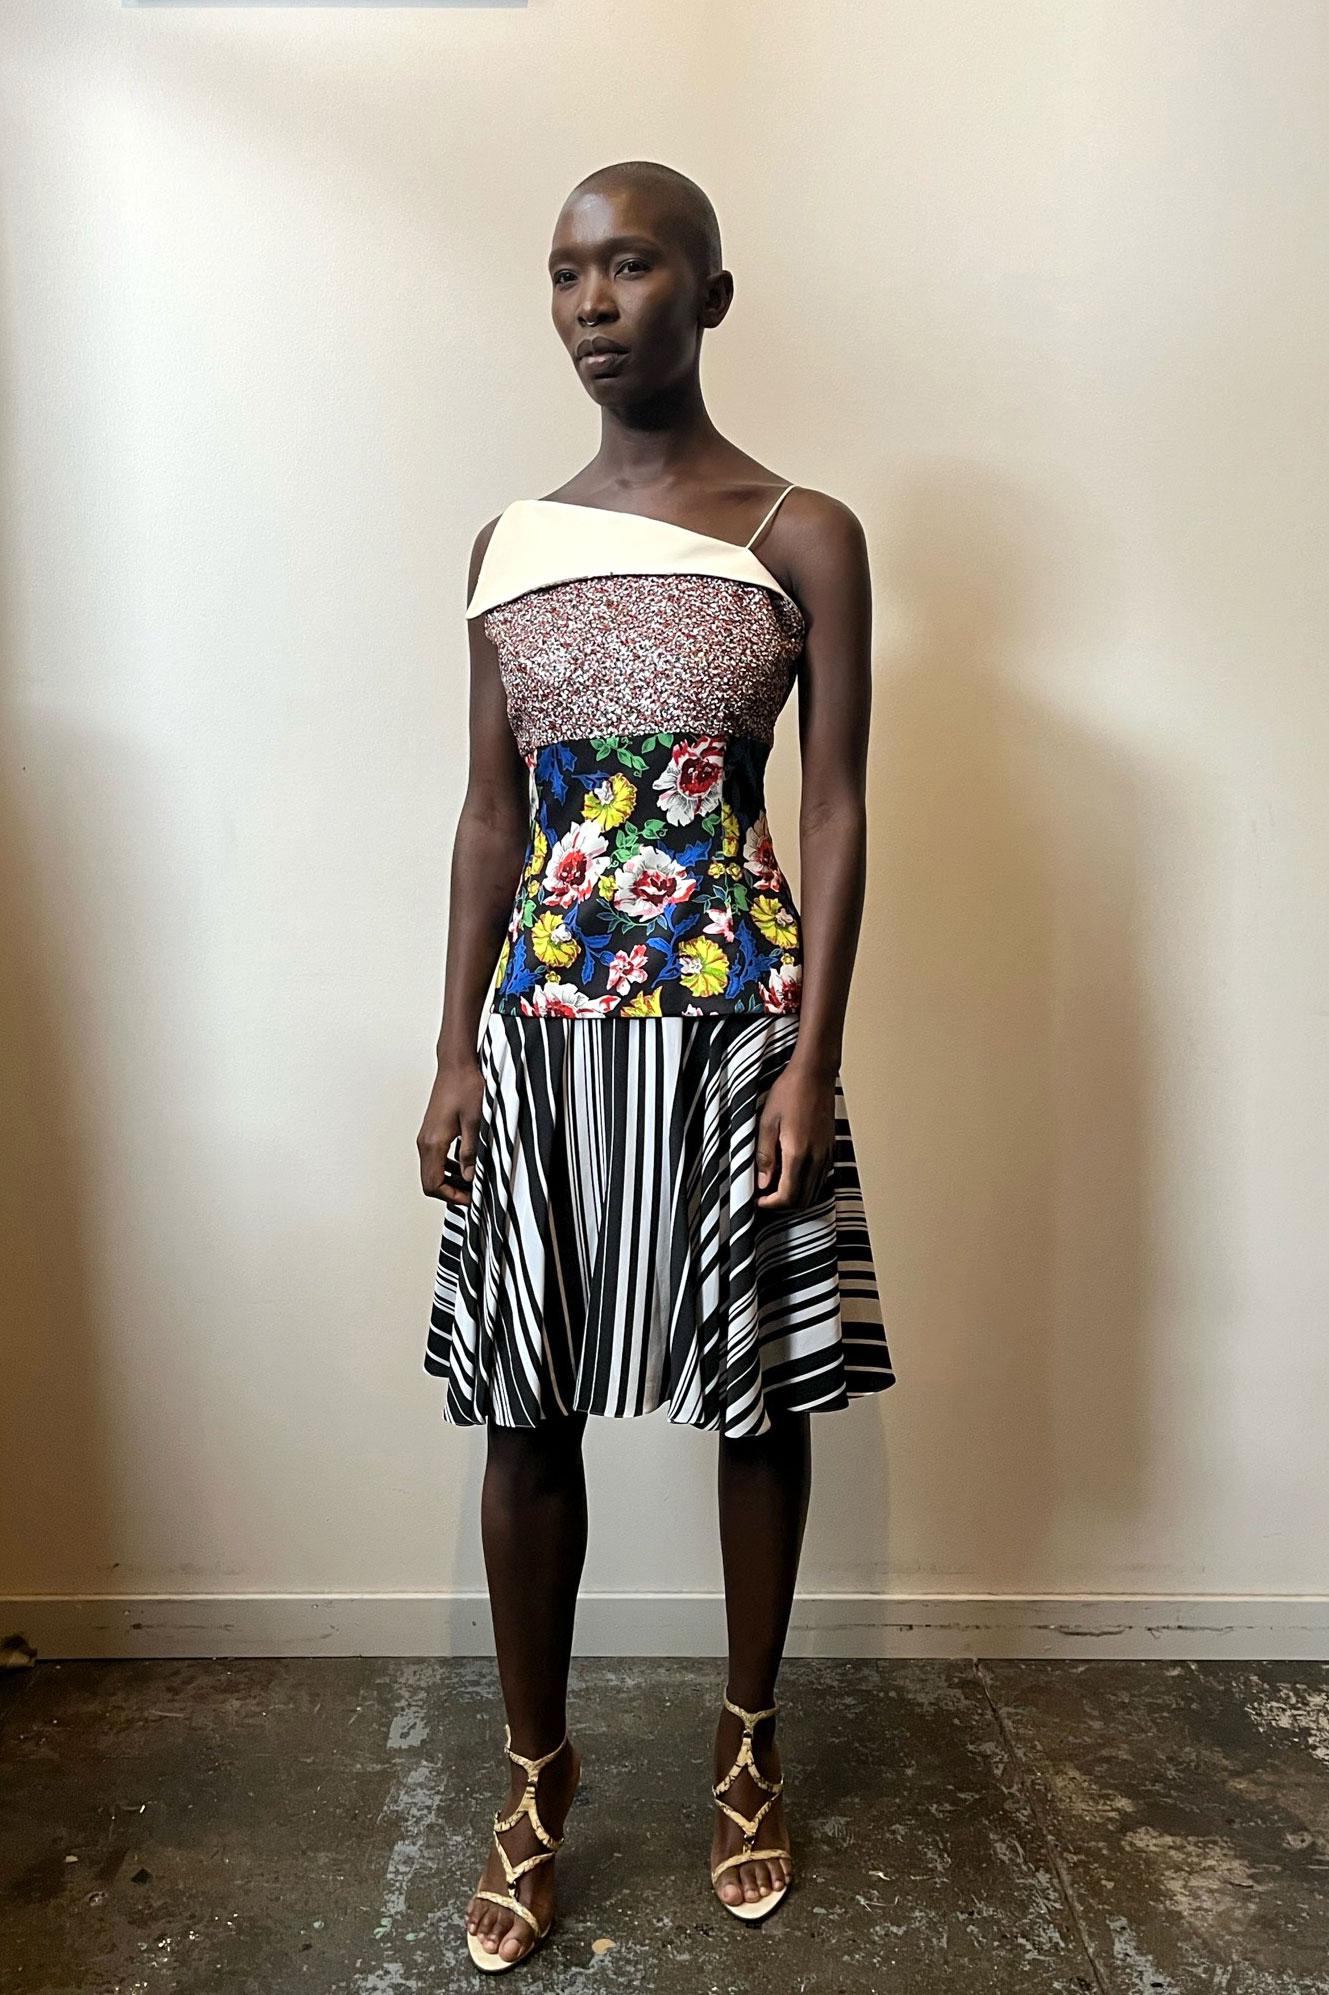 This dress from the 2015 Resort Collection has a dramatic asymmetrical contrast neckline, small straps, and a bodice embellished with multicolor sequins. The fitted waist consists of a colorful floral print, and a black and white striped print makes